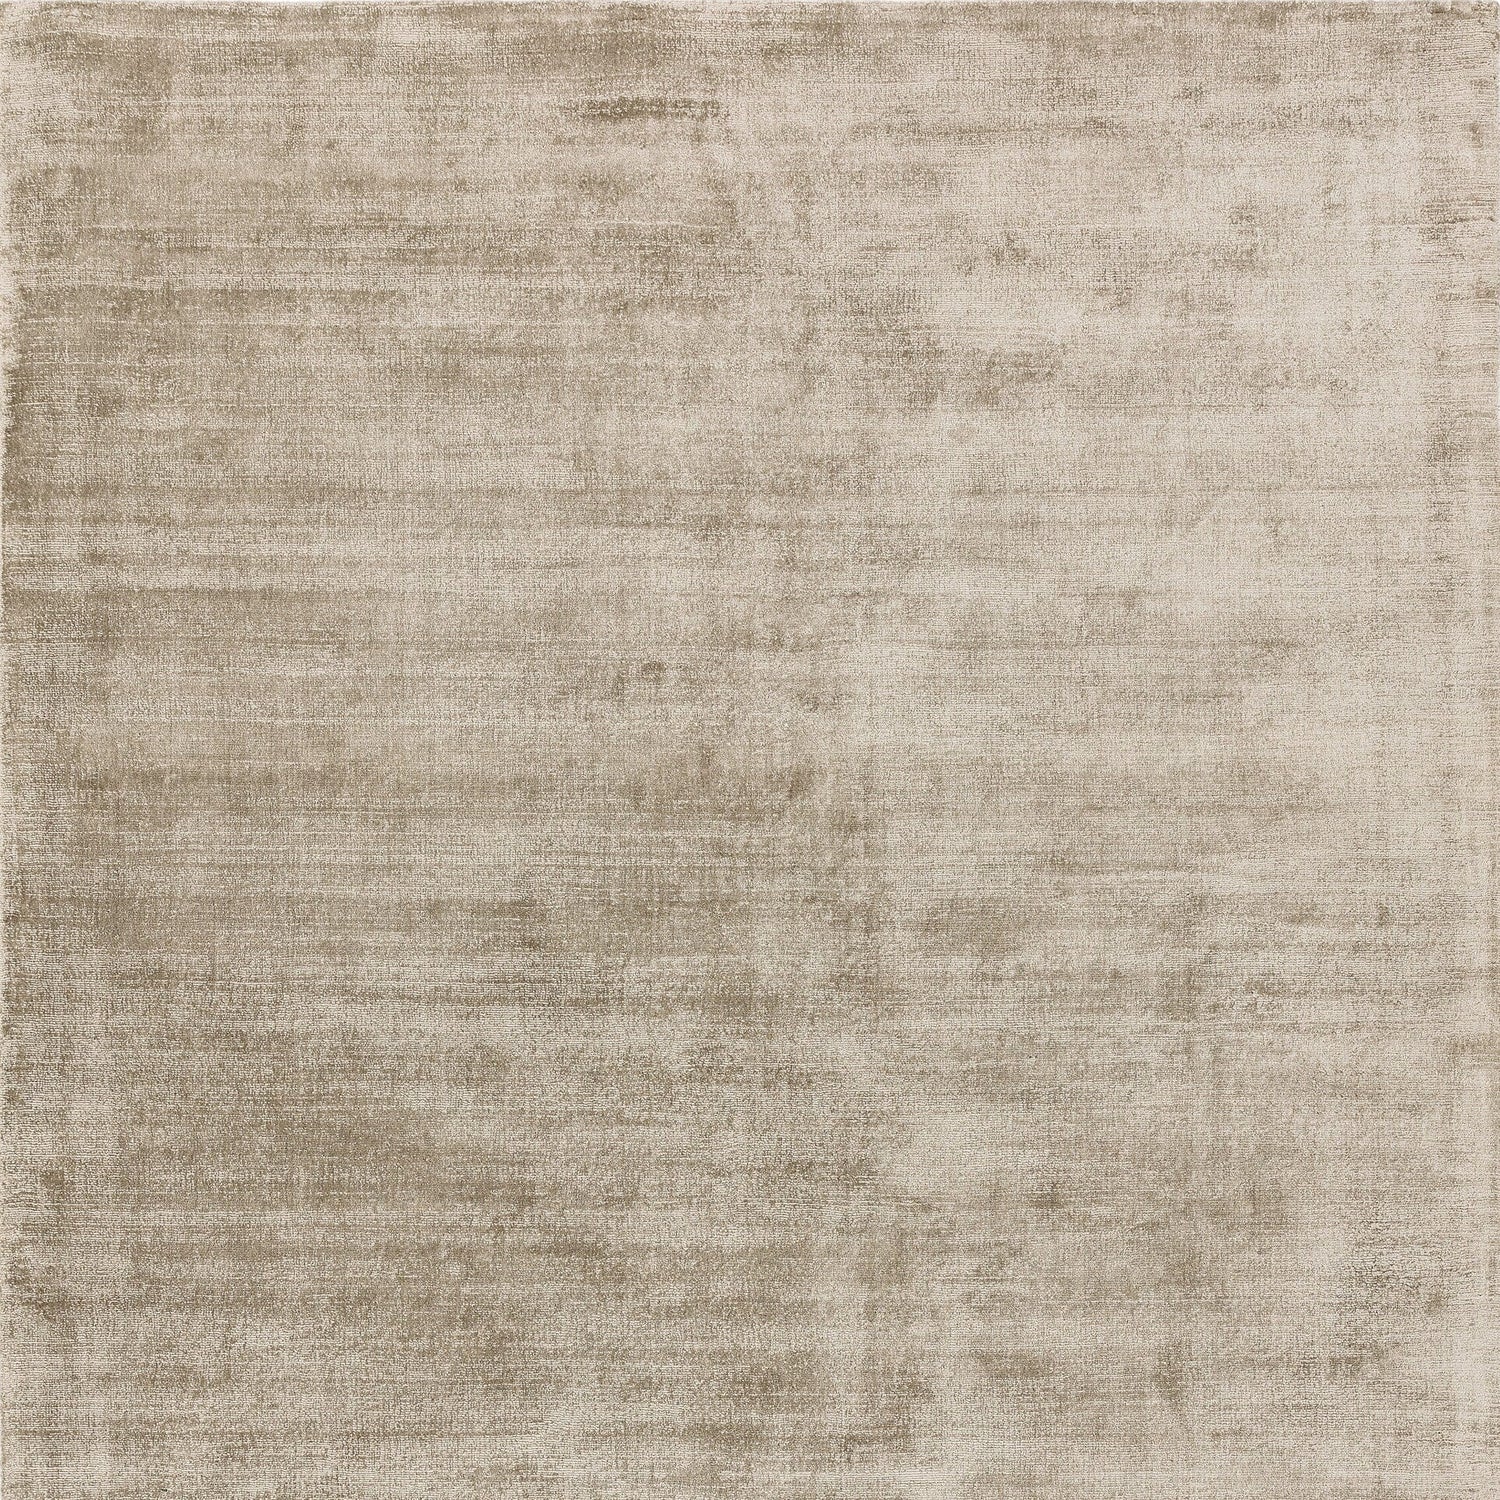  Asiatic Carpets-Asiatic Carpets Blade Hand Woven Runner Smoke - 66 x 240cm-Grey, Silver 949 